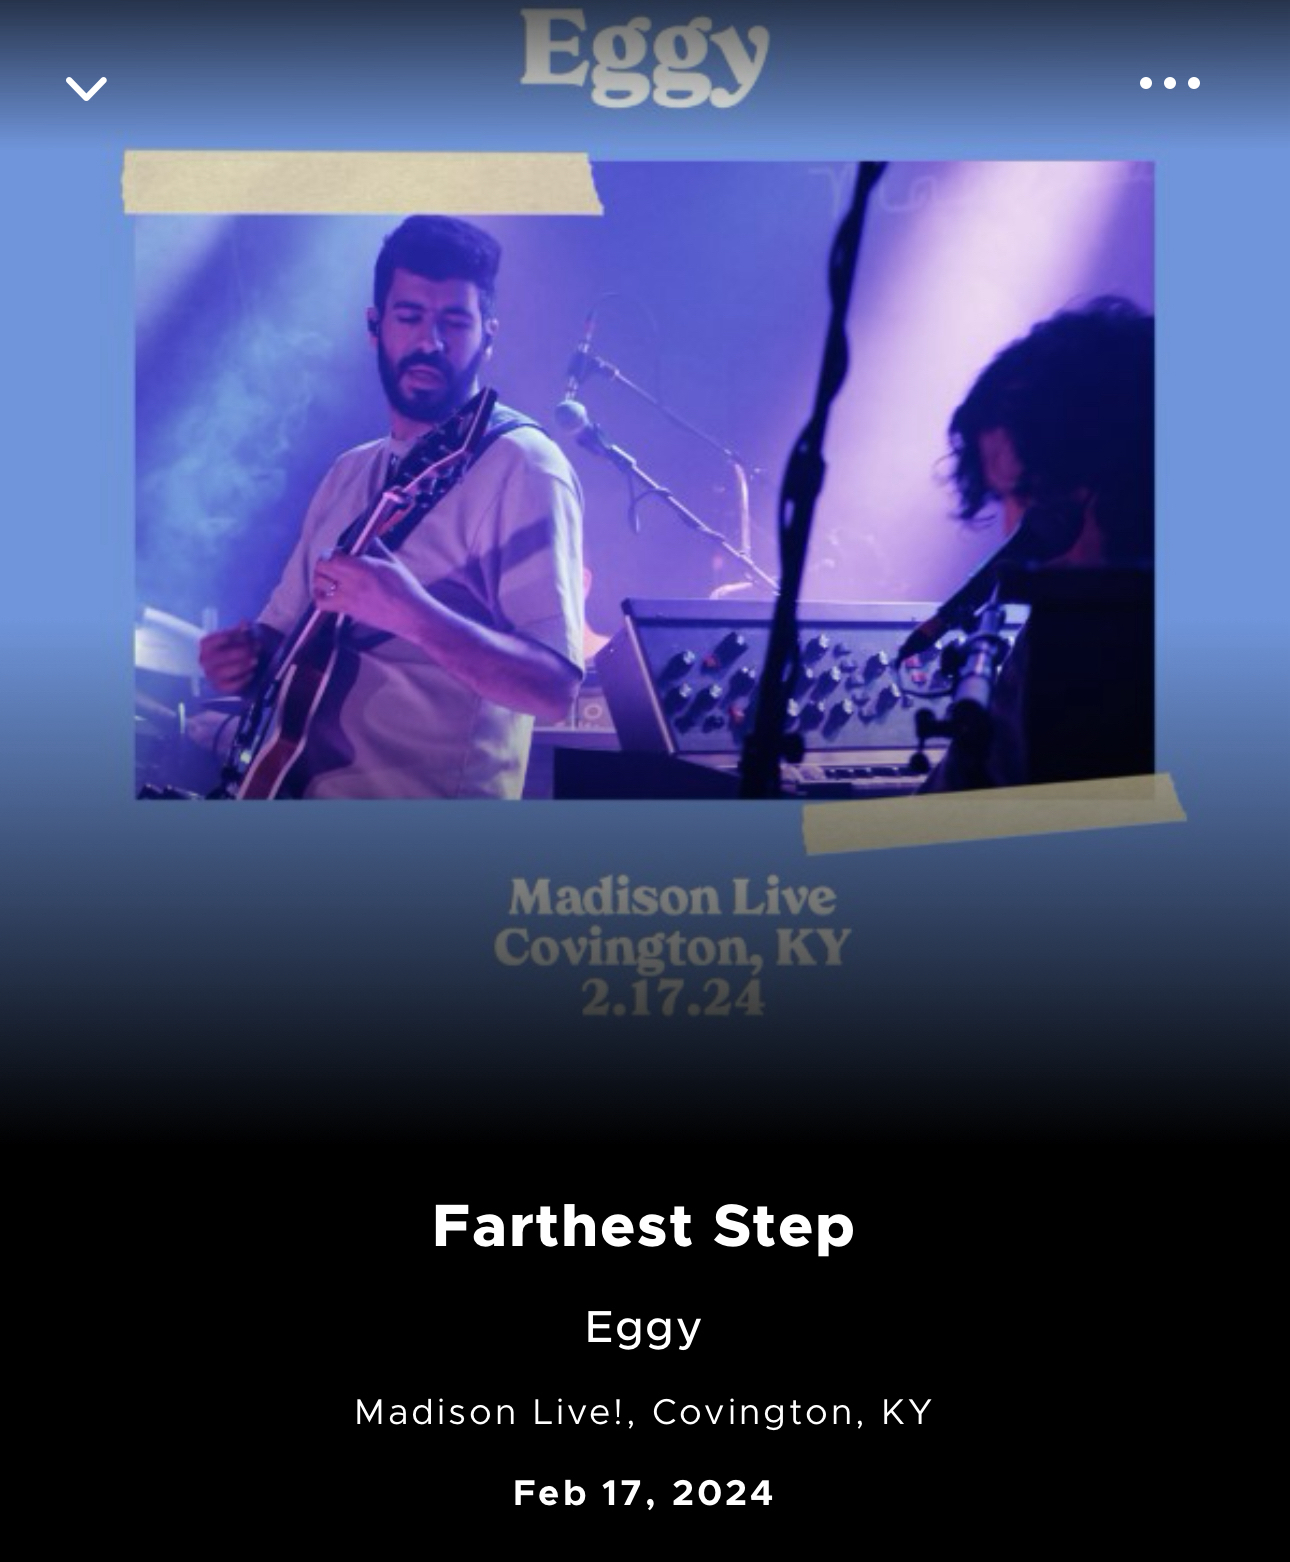 A promotional music player interface for the band Eggy, featuring an image of two musicians on stage, with one playing the guitar and the other on keyboards. Below the image, text indicates the song title “Farthest Step” by Eggy